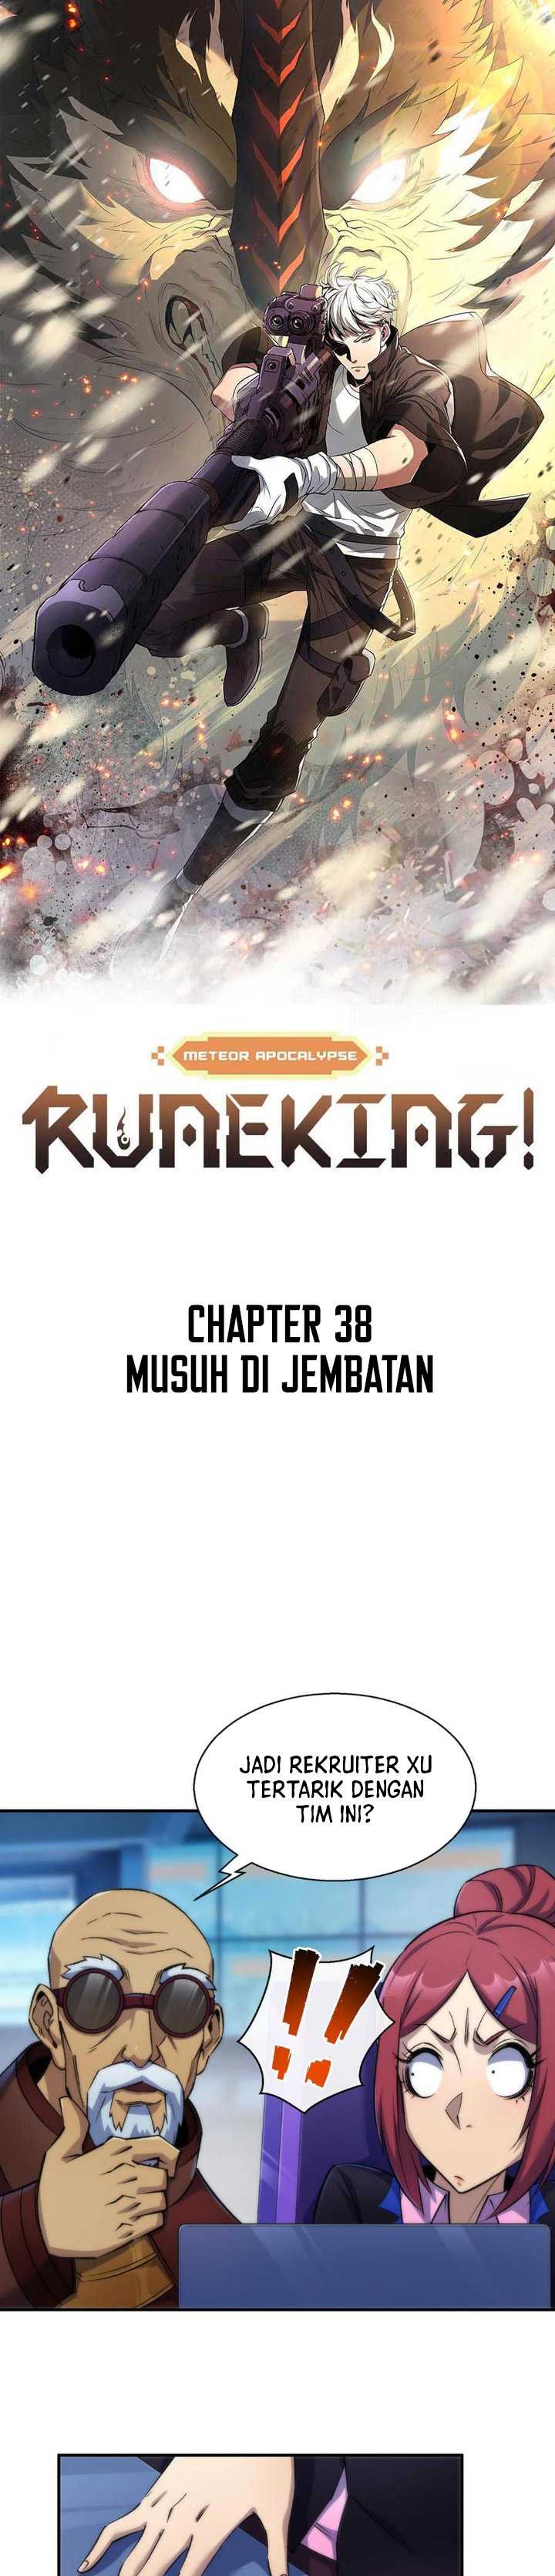 King of Runes Chapter 38